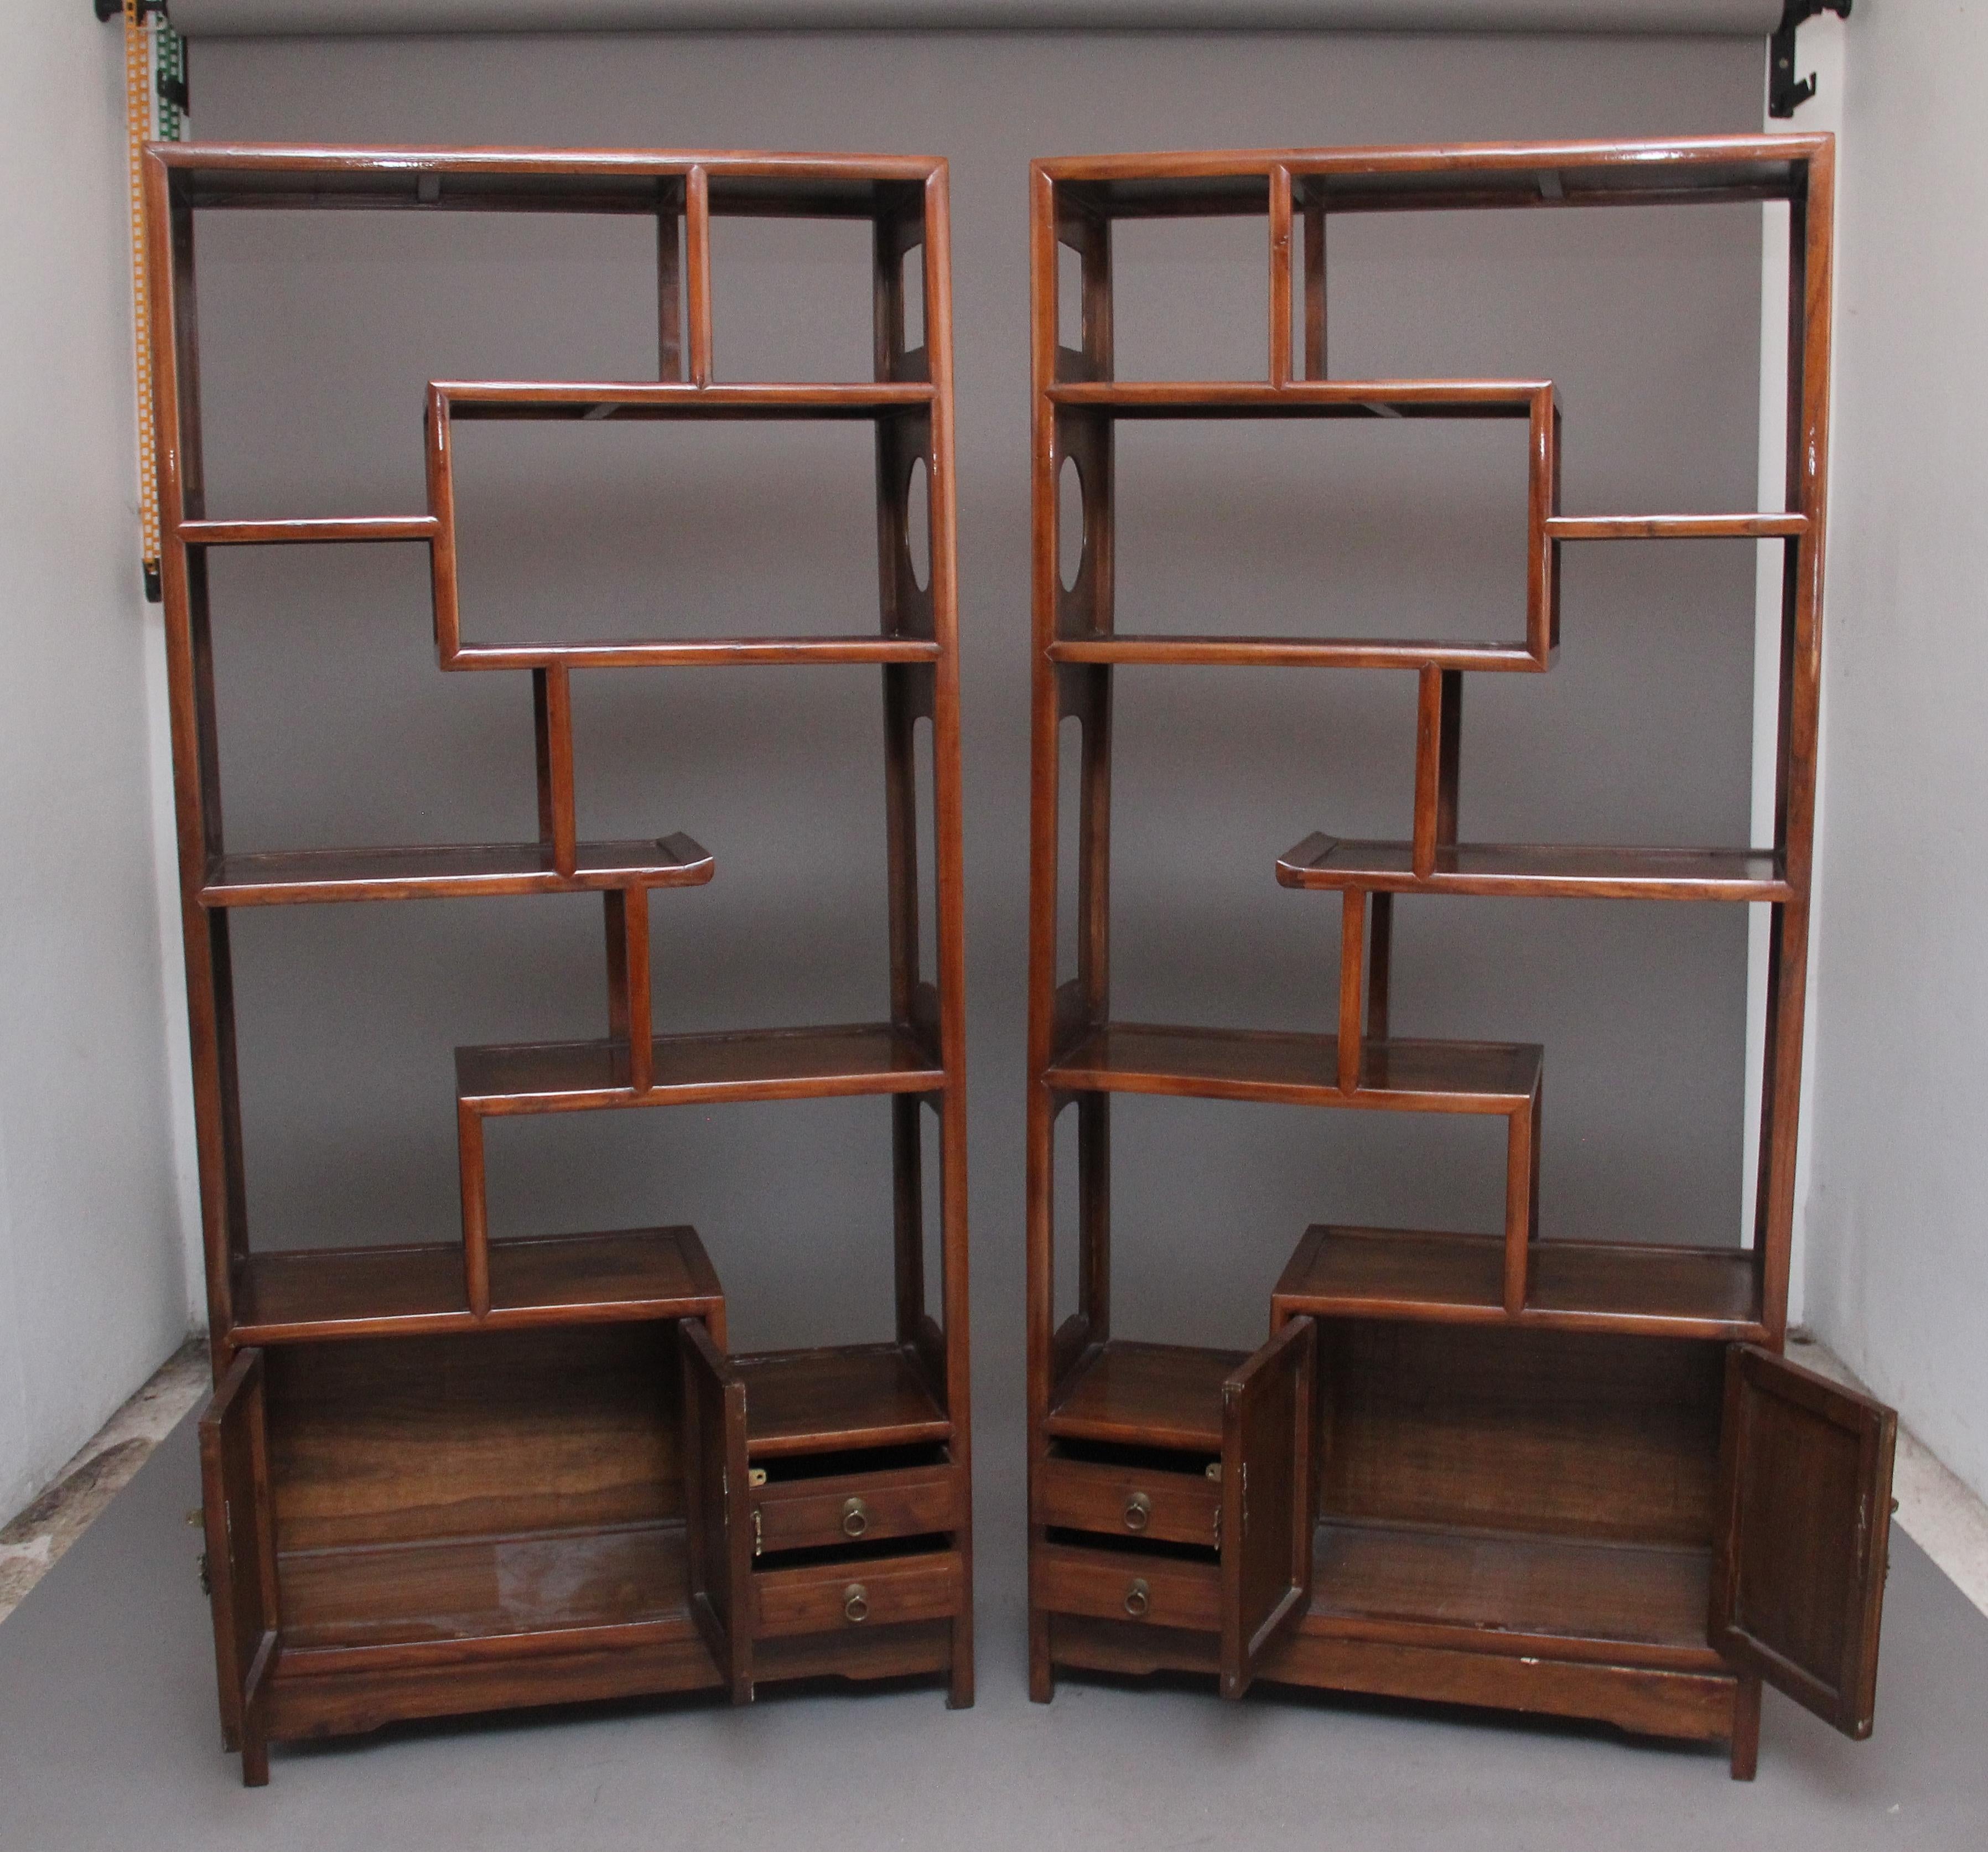 Pair of Early 20th Century Chinese Display Cabinets In Good Condition For Sale In Martlesham, GB